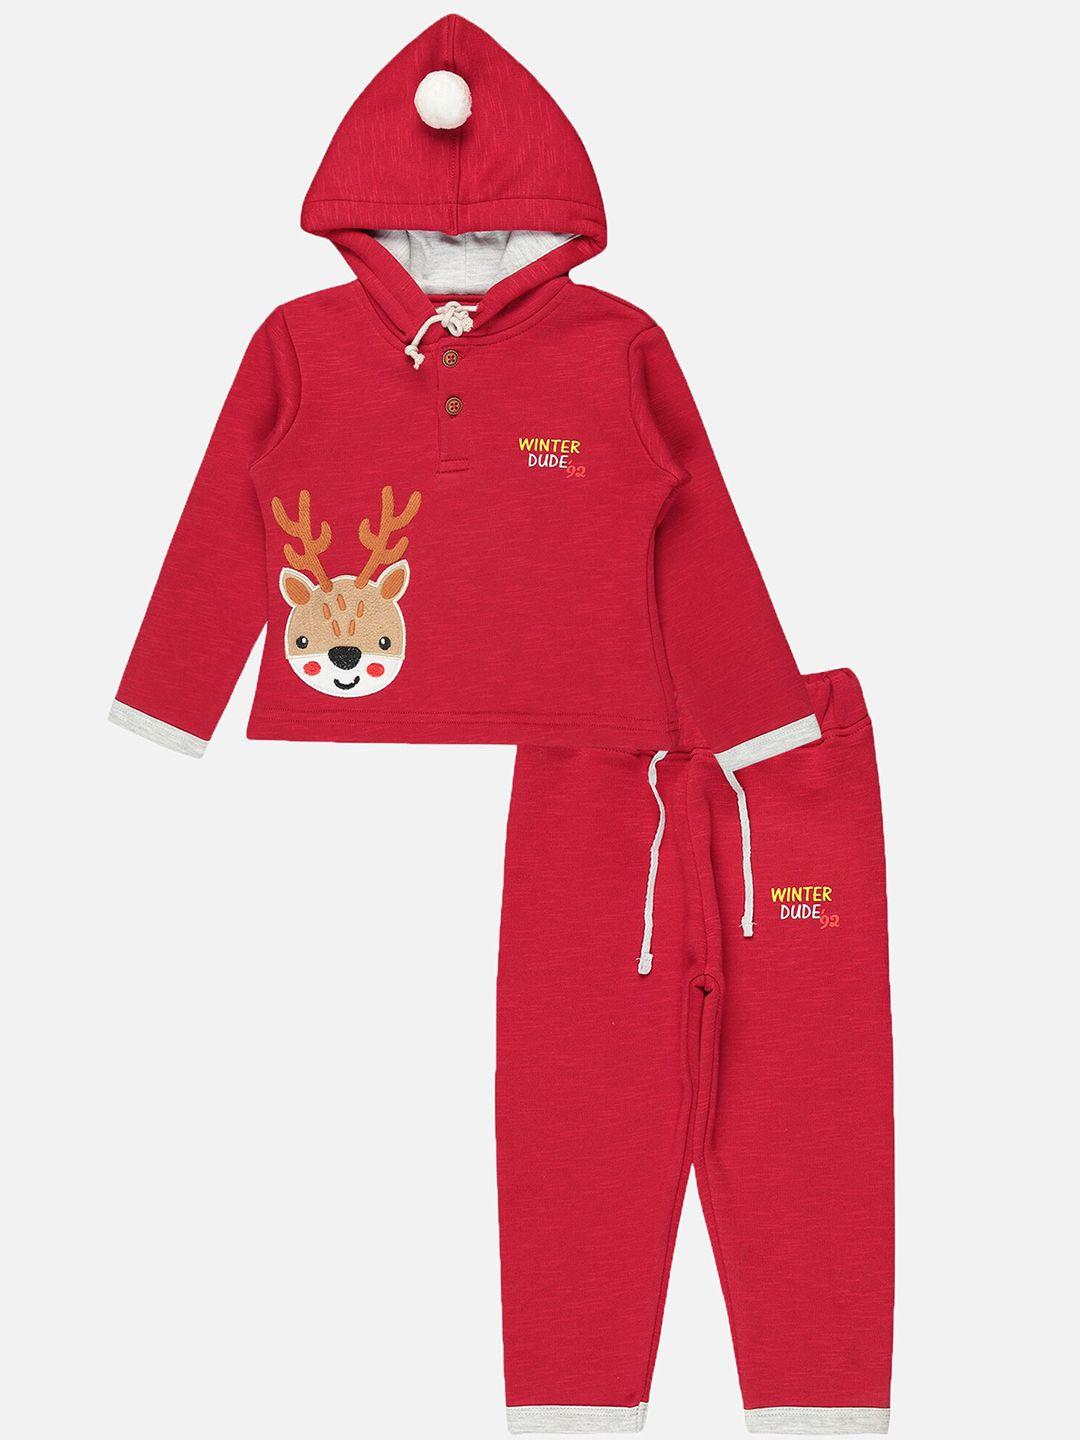 bodycare-kids-infant-boys-applique-detailed-hooded-sweatshirt-with-trouser